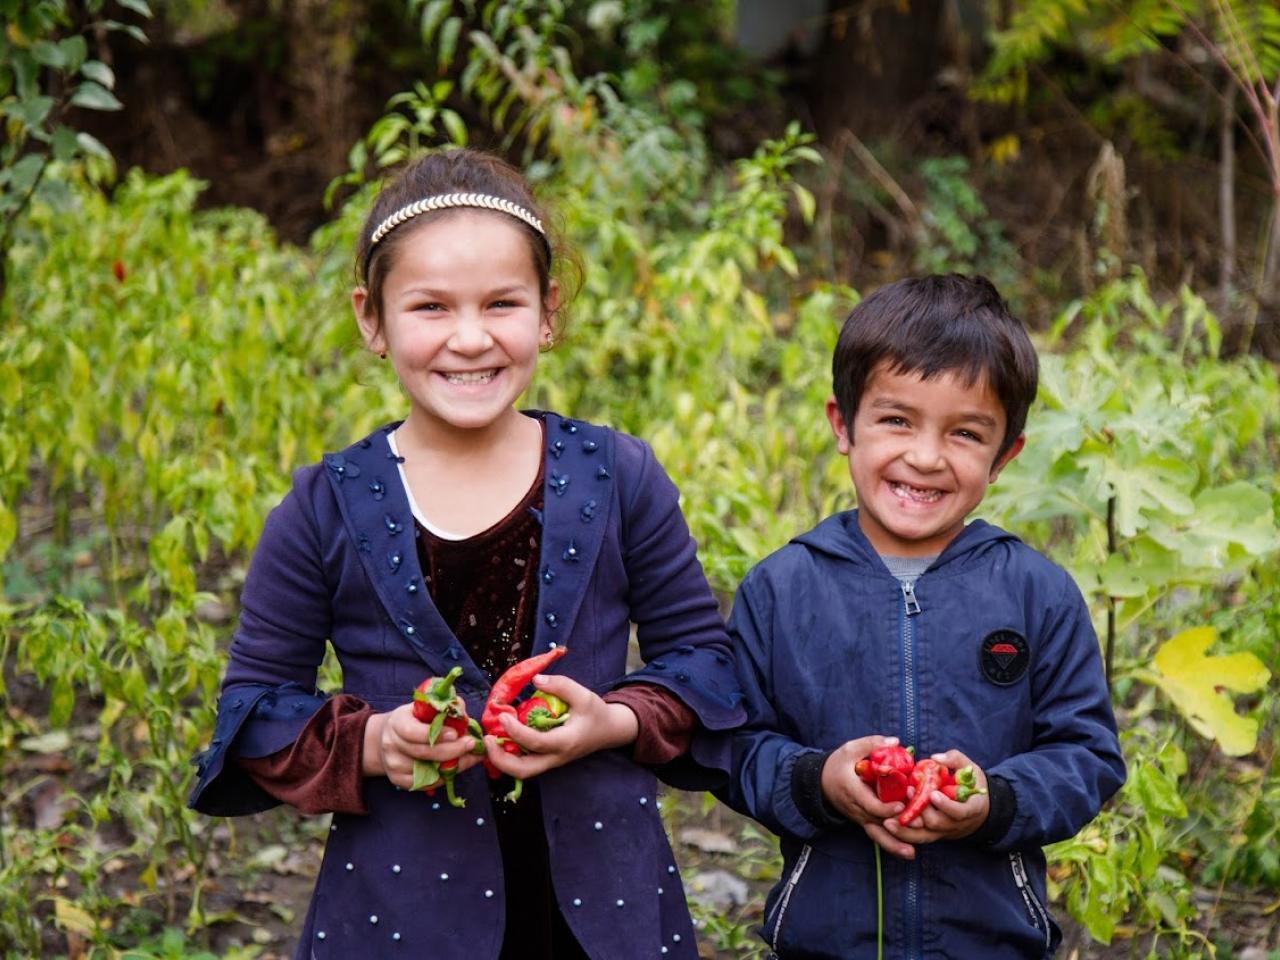 A girl and a boy smile in a garden holding vegetables